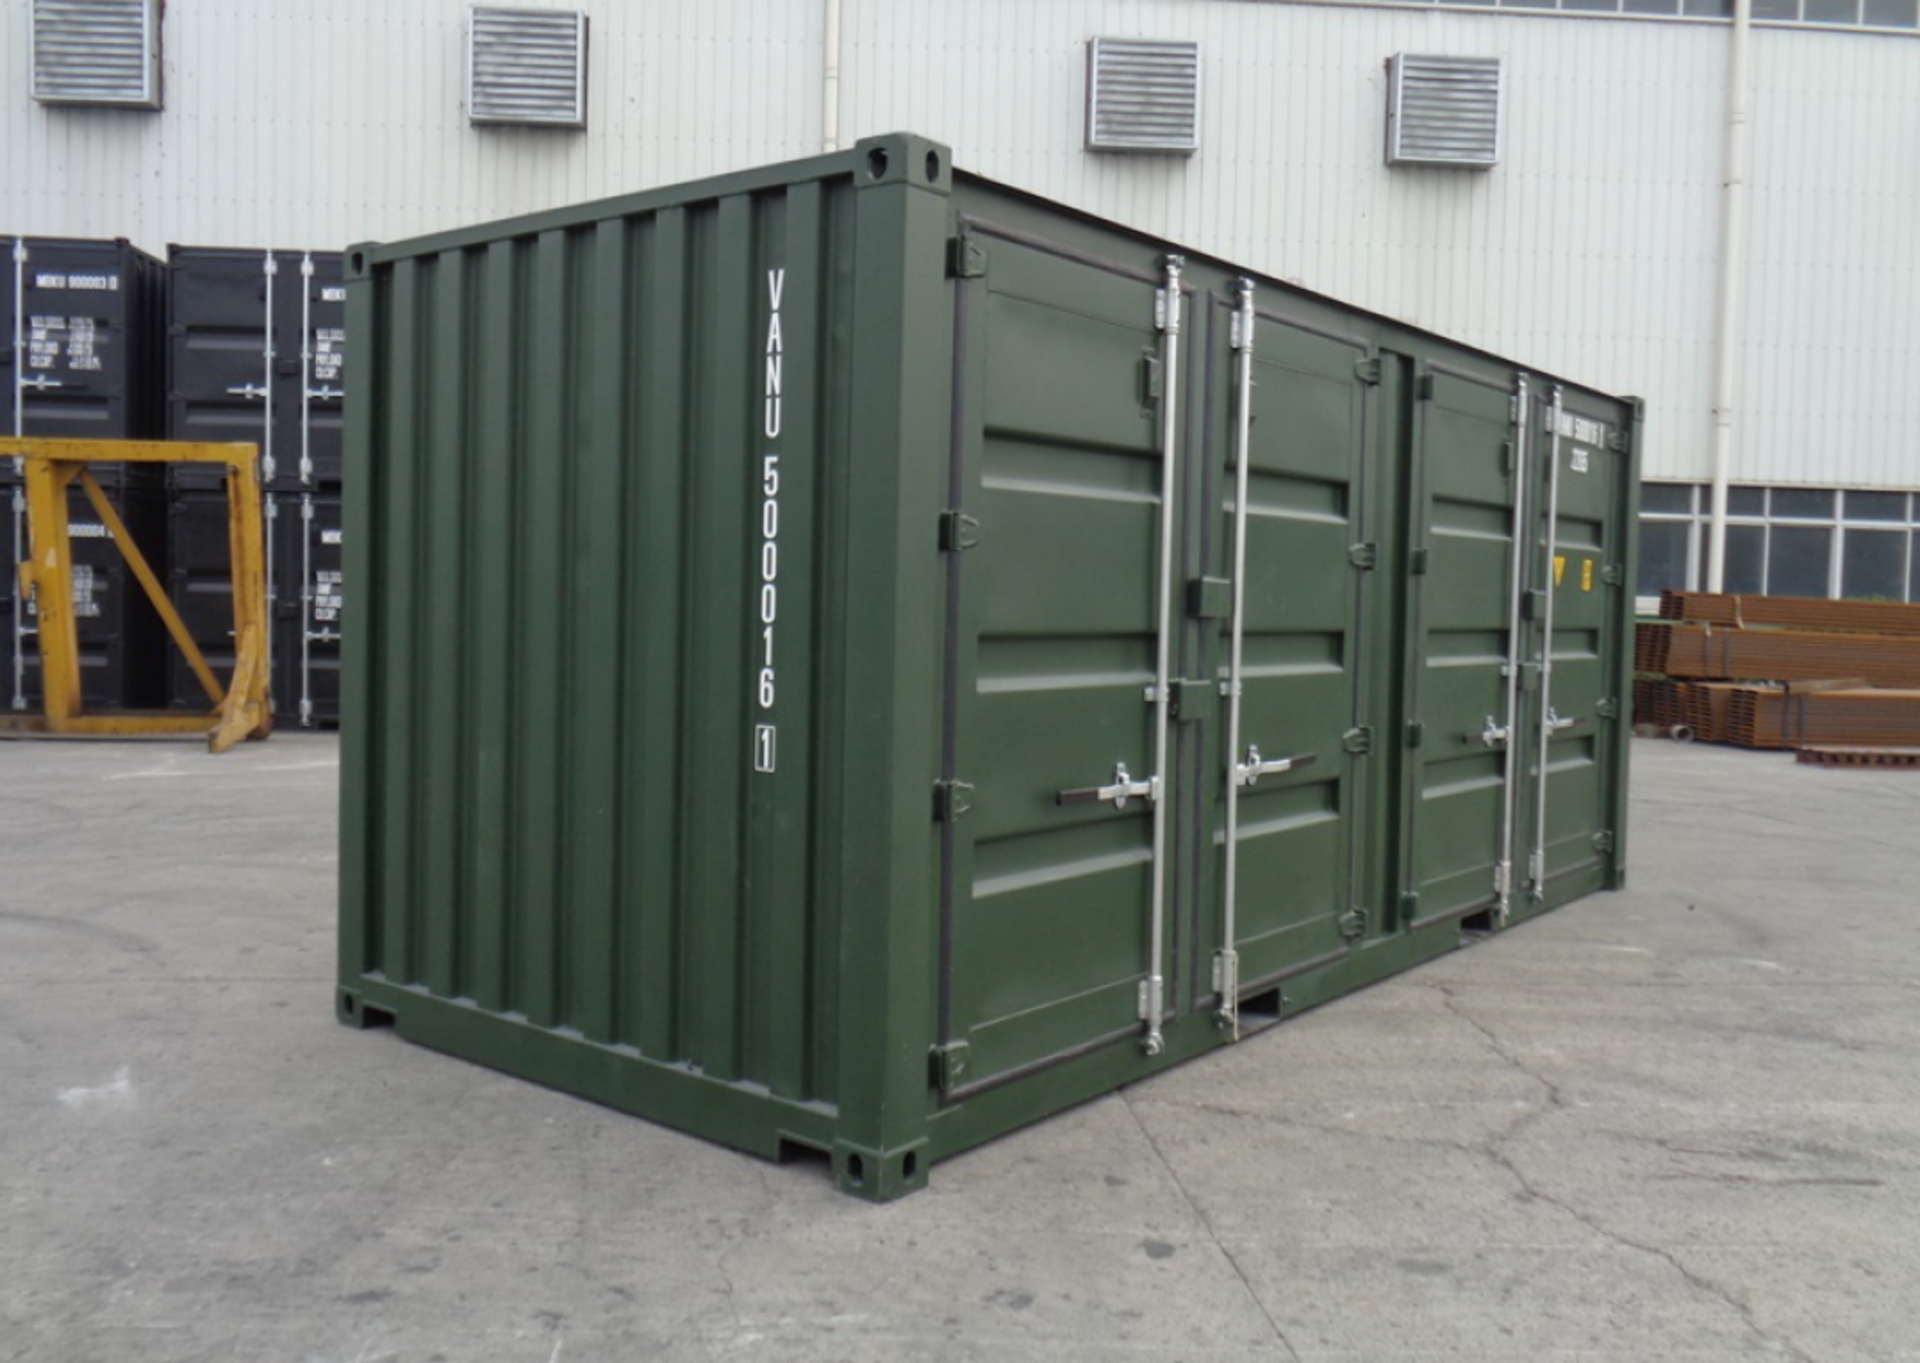 One Trip 20ft Multi Compartmentalised Shipping Container (4 rooms) - Image 3 of 7